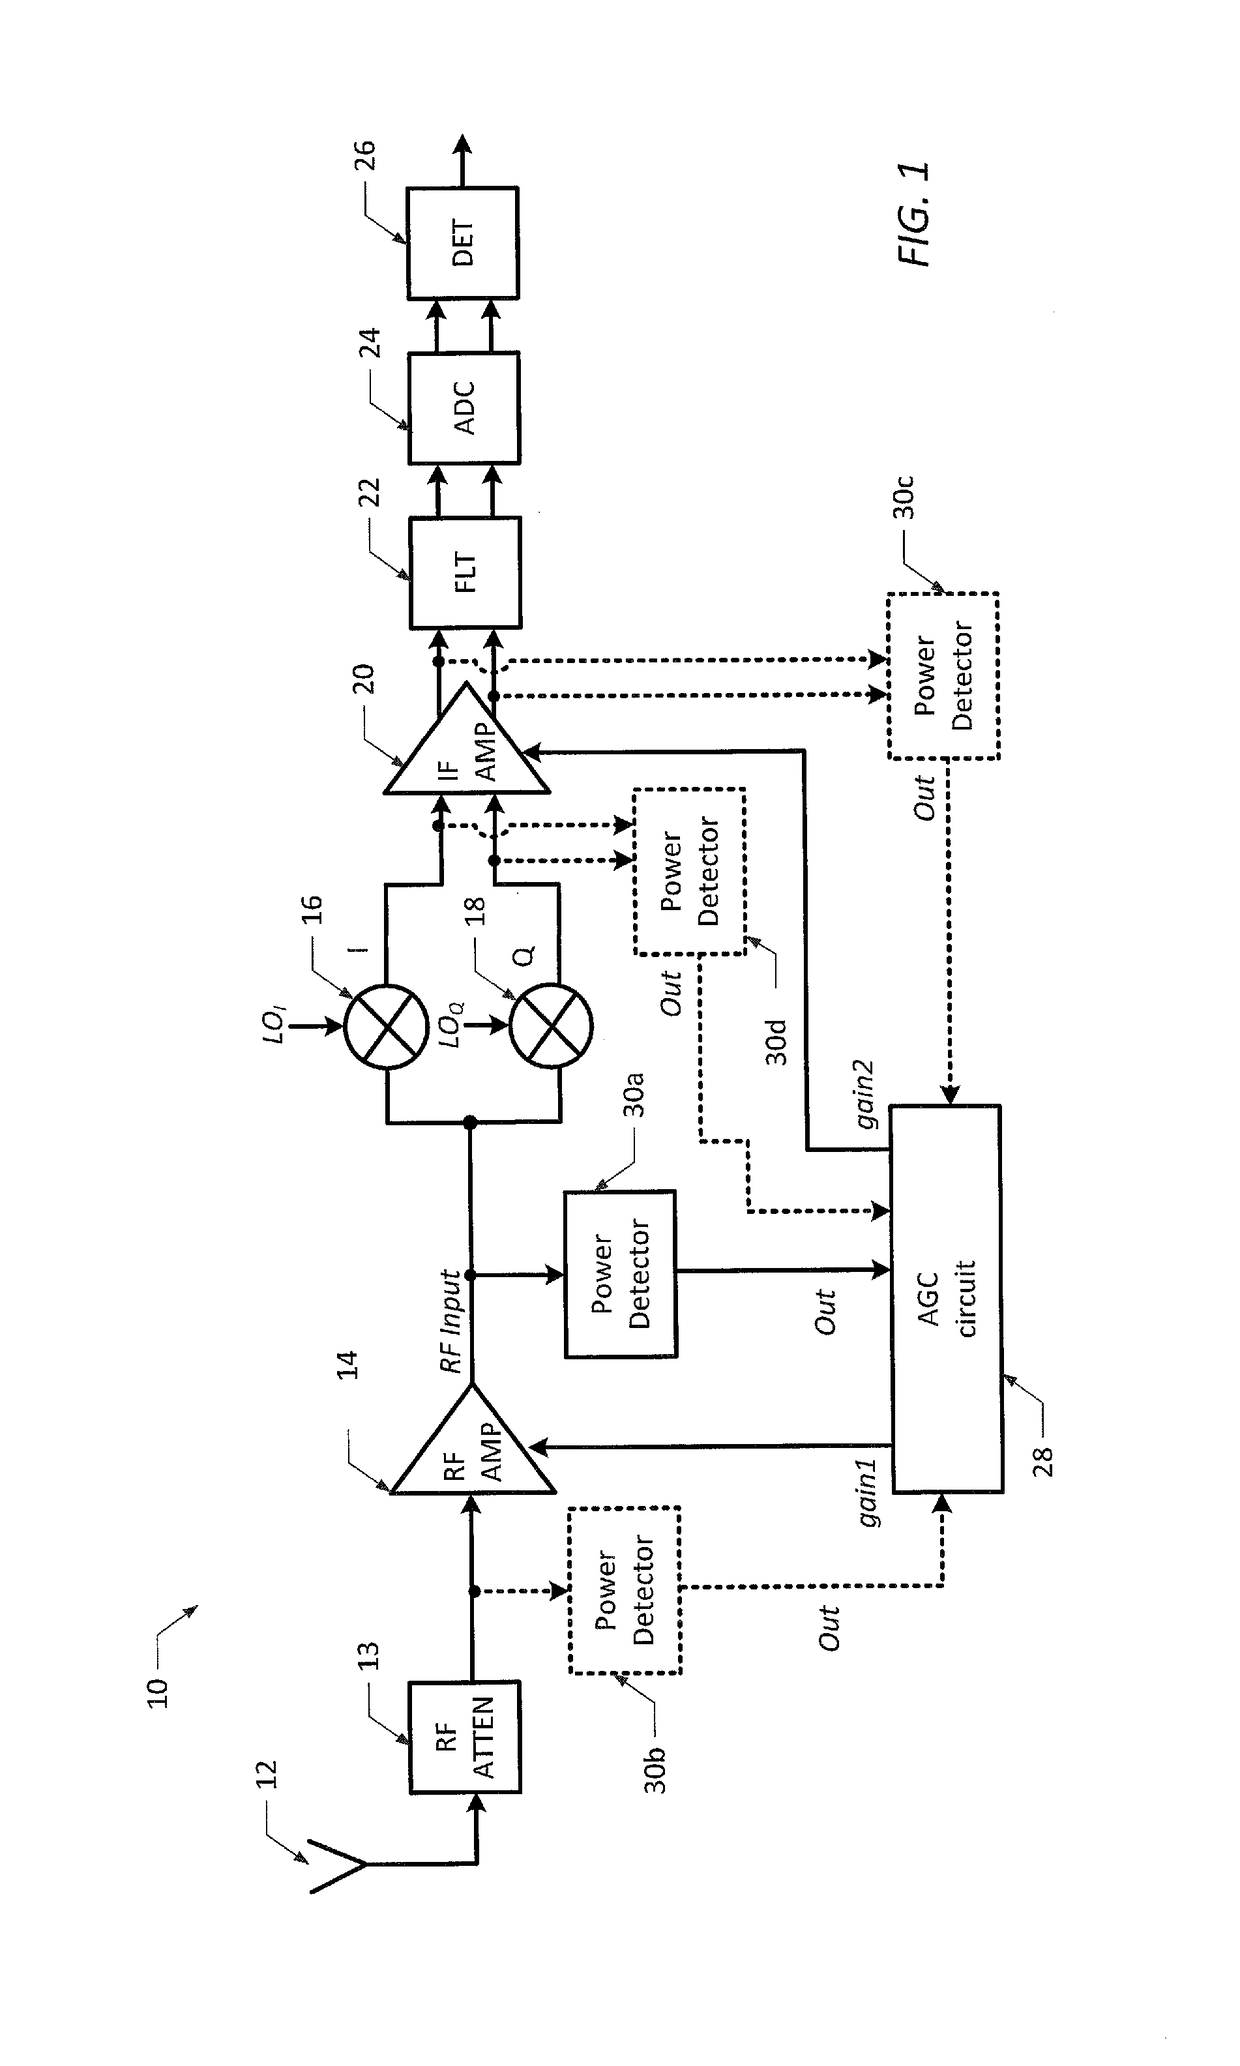 Accurate, low-power power detector circuits and related methods using programmable reference circuitry